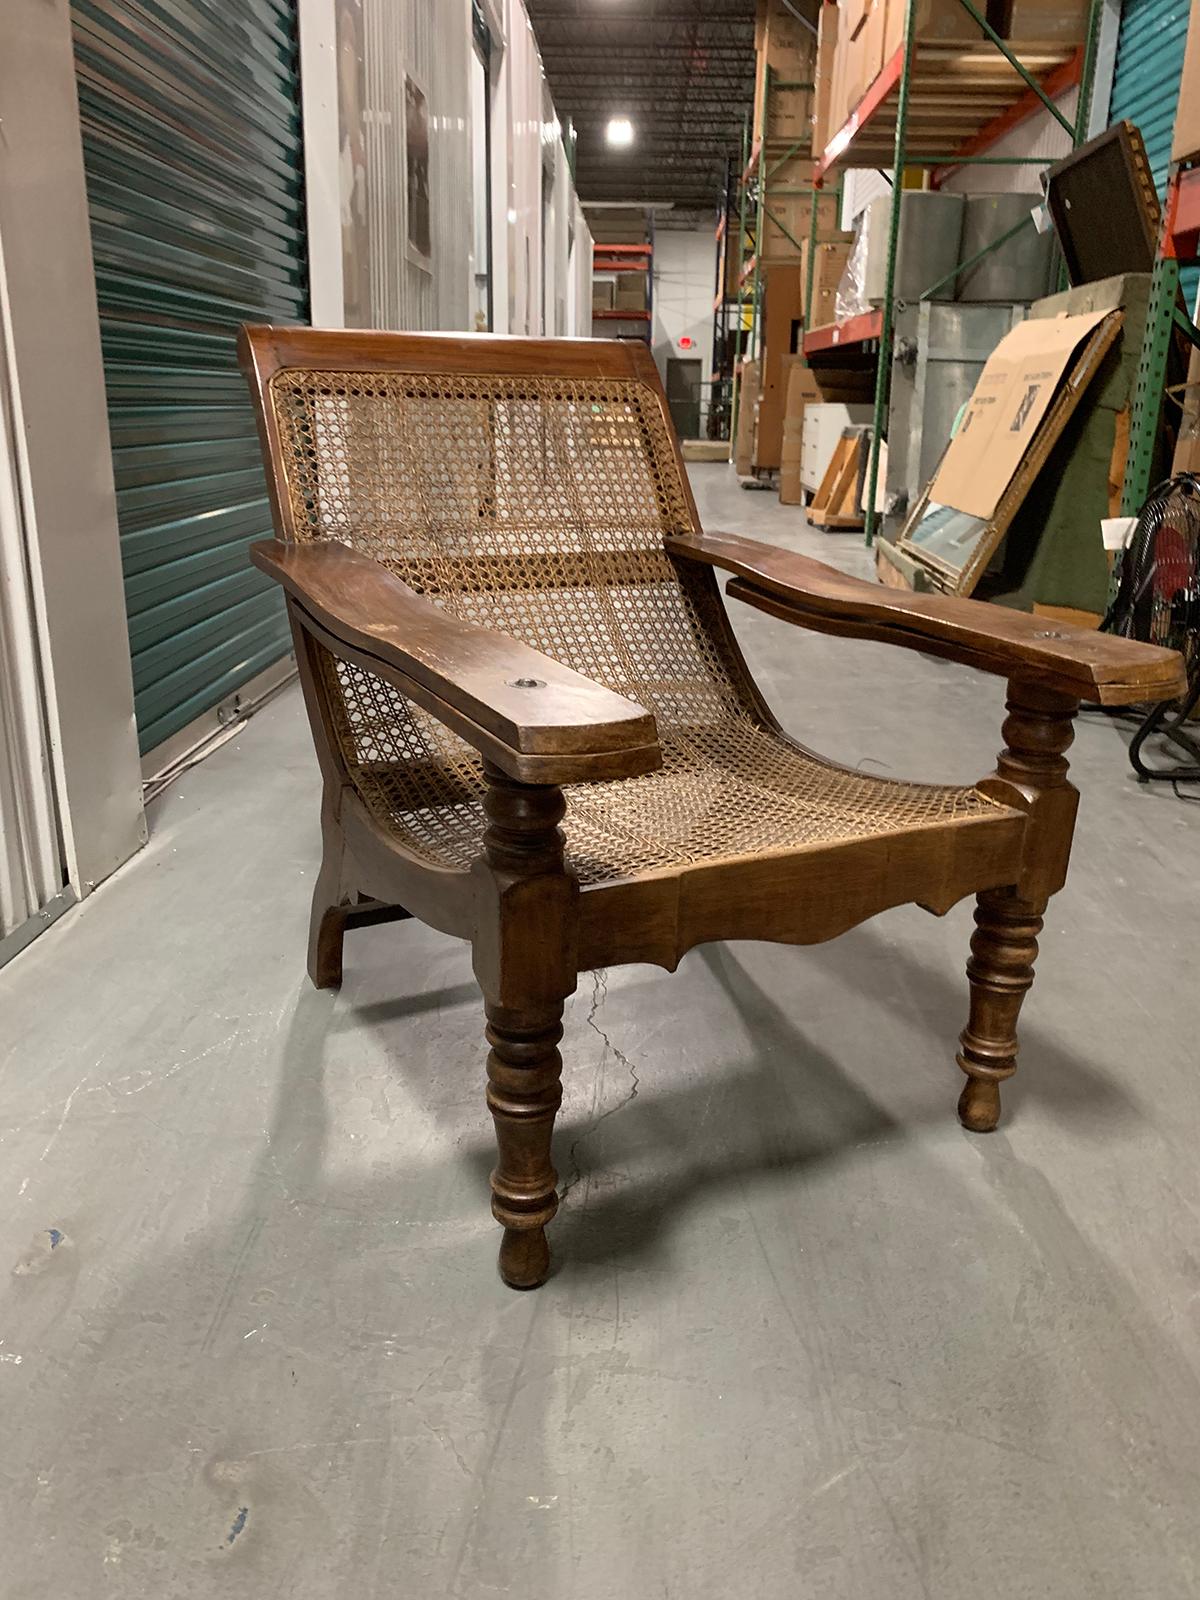 19th-early 20th century Anglo-Caribbean caned planters chair with leg stretchers
Measures: 29.75